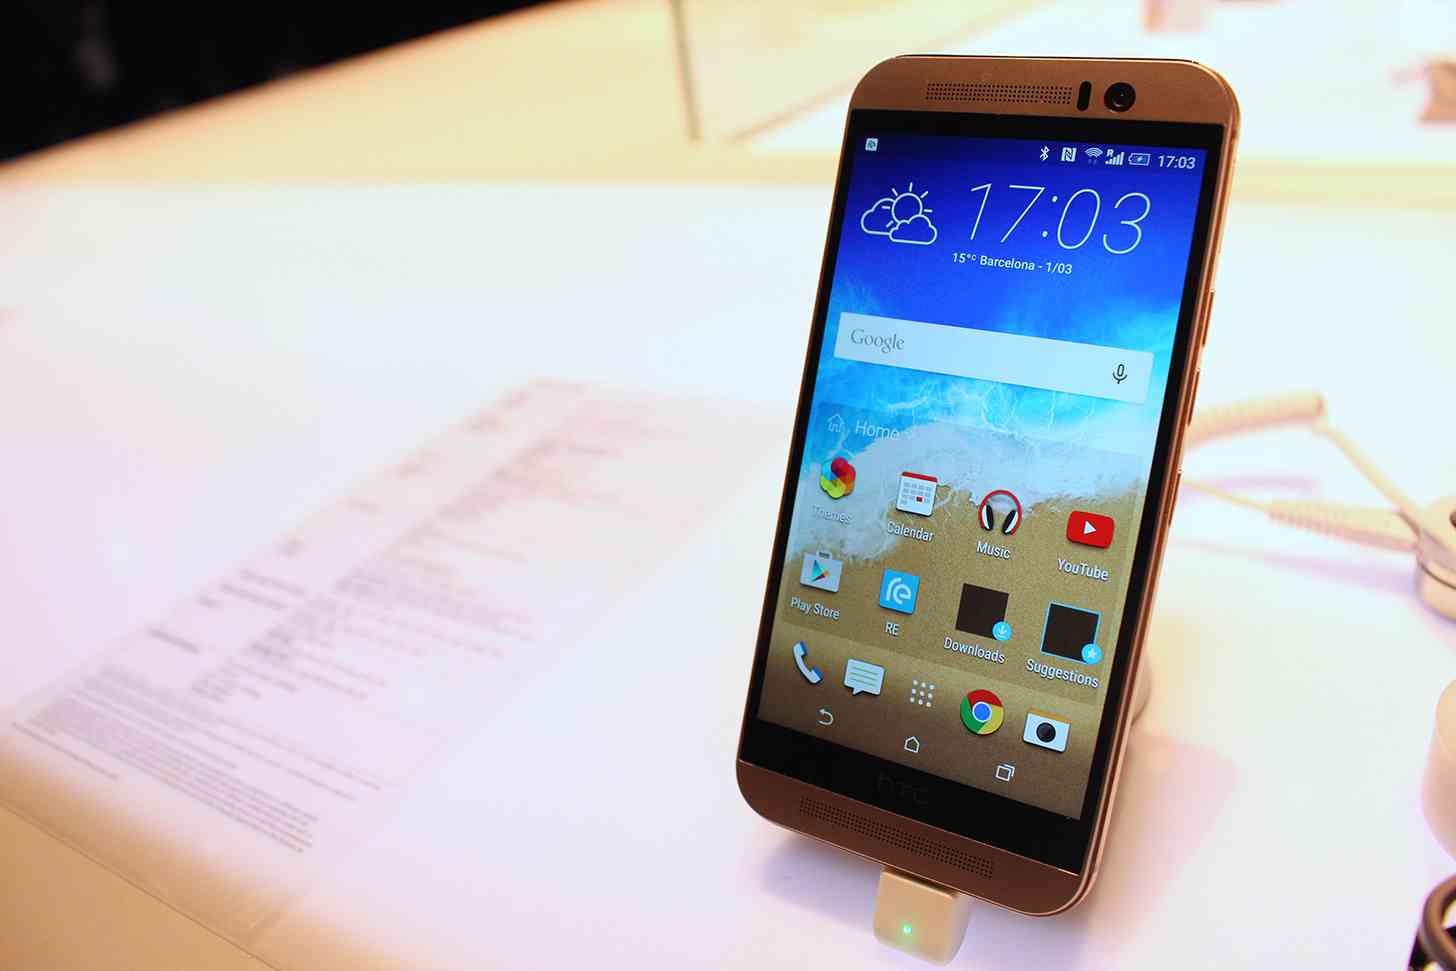 HTC One M9 hands on